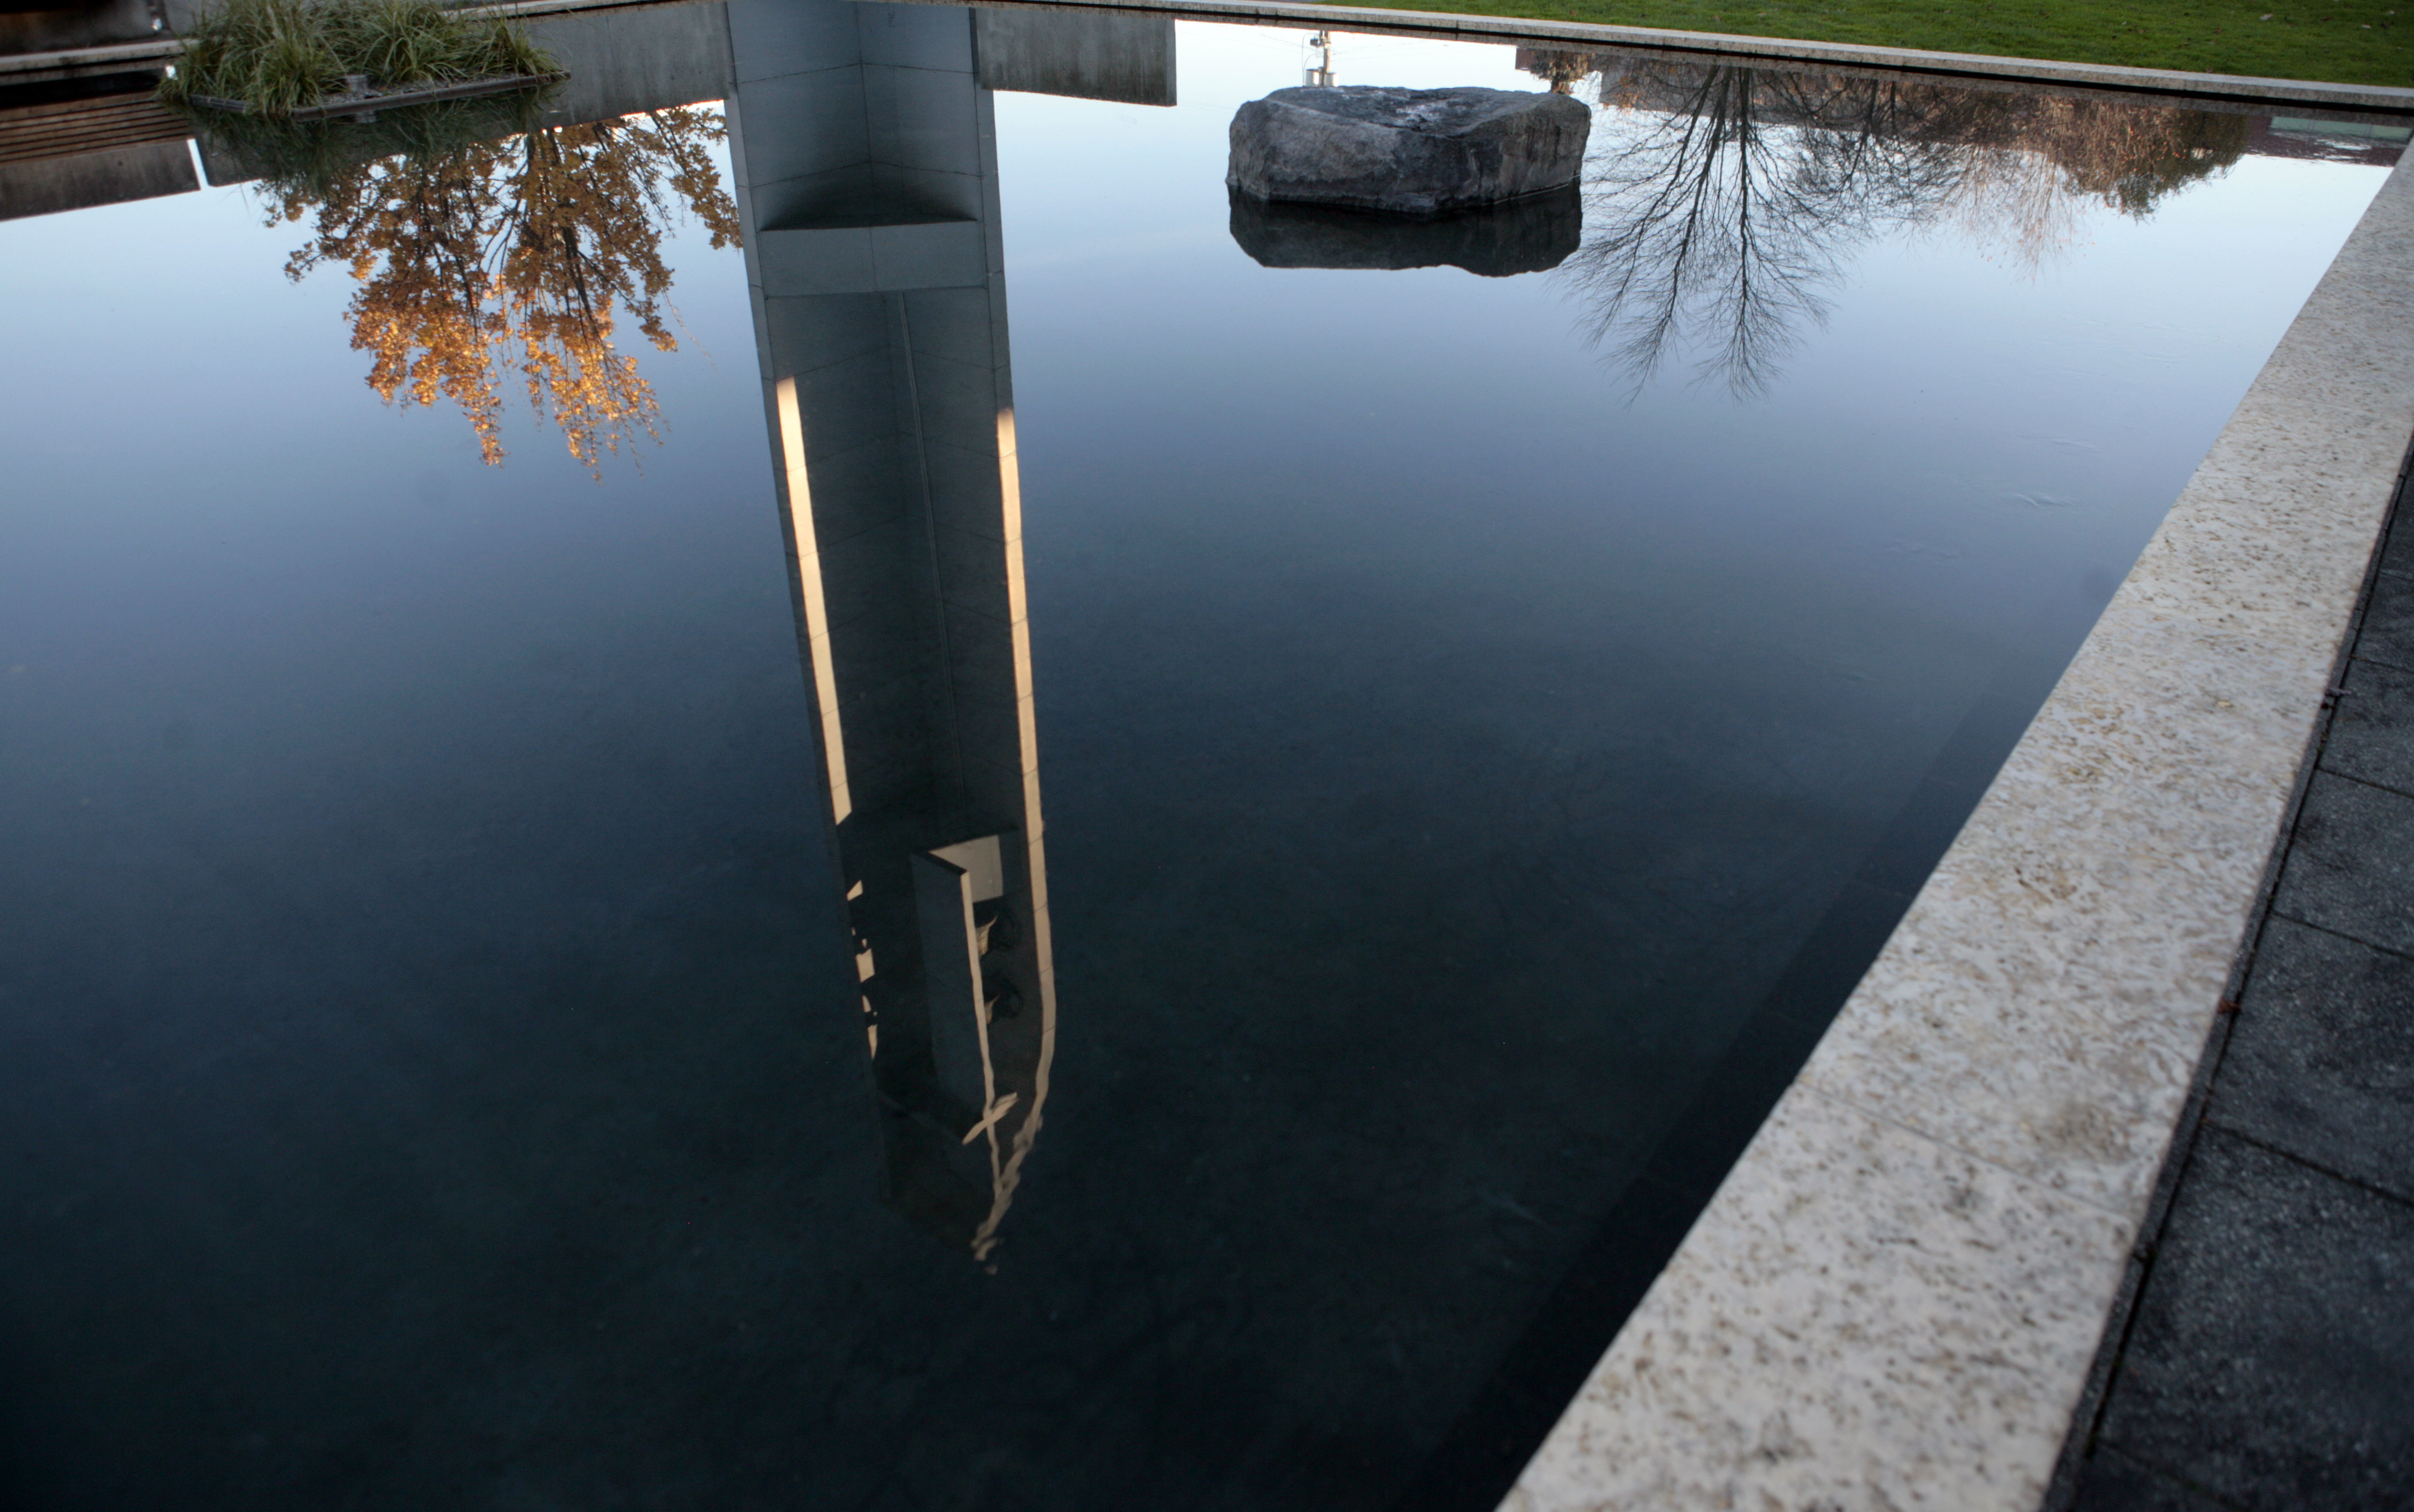 Bell Tower Reflects in Pool